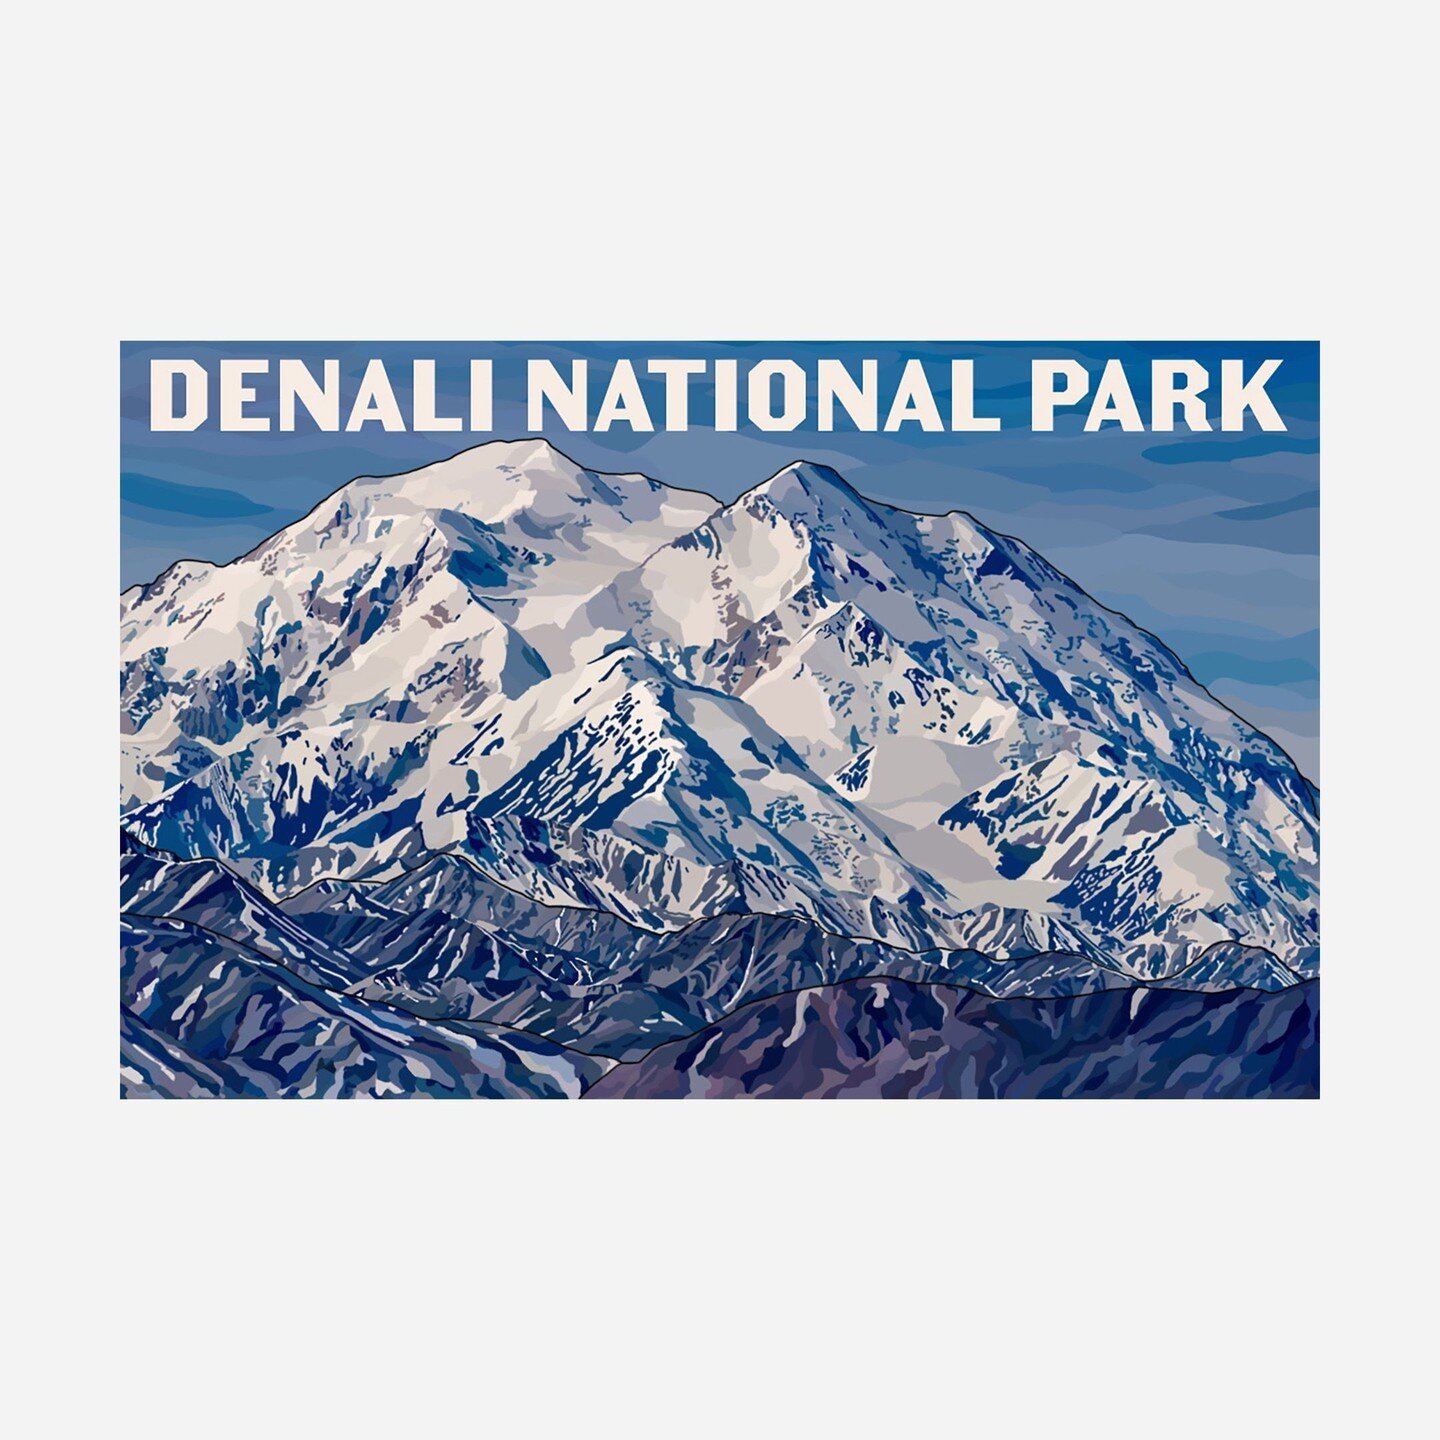 I'm super excited to share this new design with you! It will be part of my August product launch, so be sure to check back in and see it in the shop.

#stickershop #hydroflaskstickers #stickerblitz #waterbottlestickers #denali #denalinps #alaskanps #